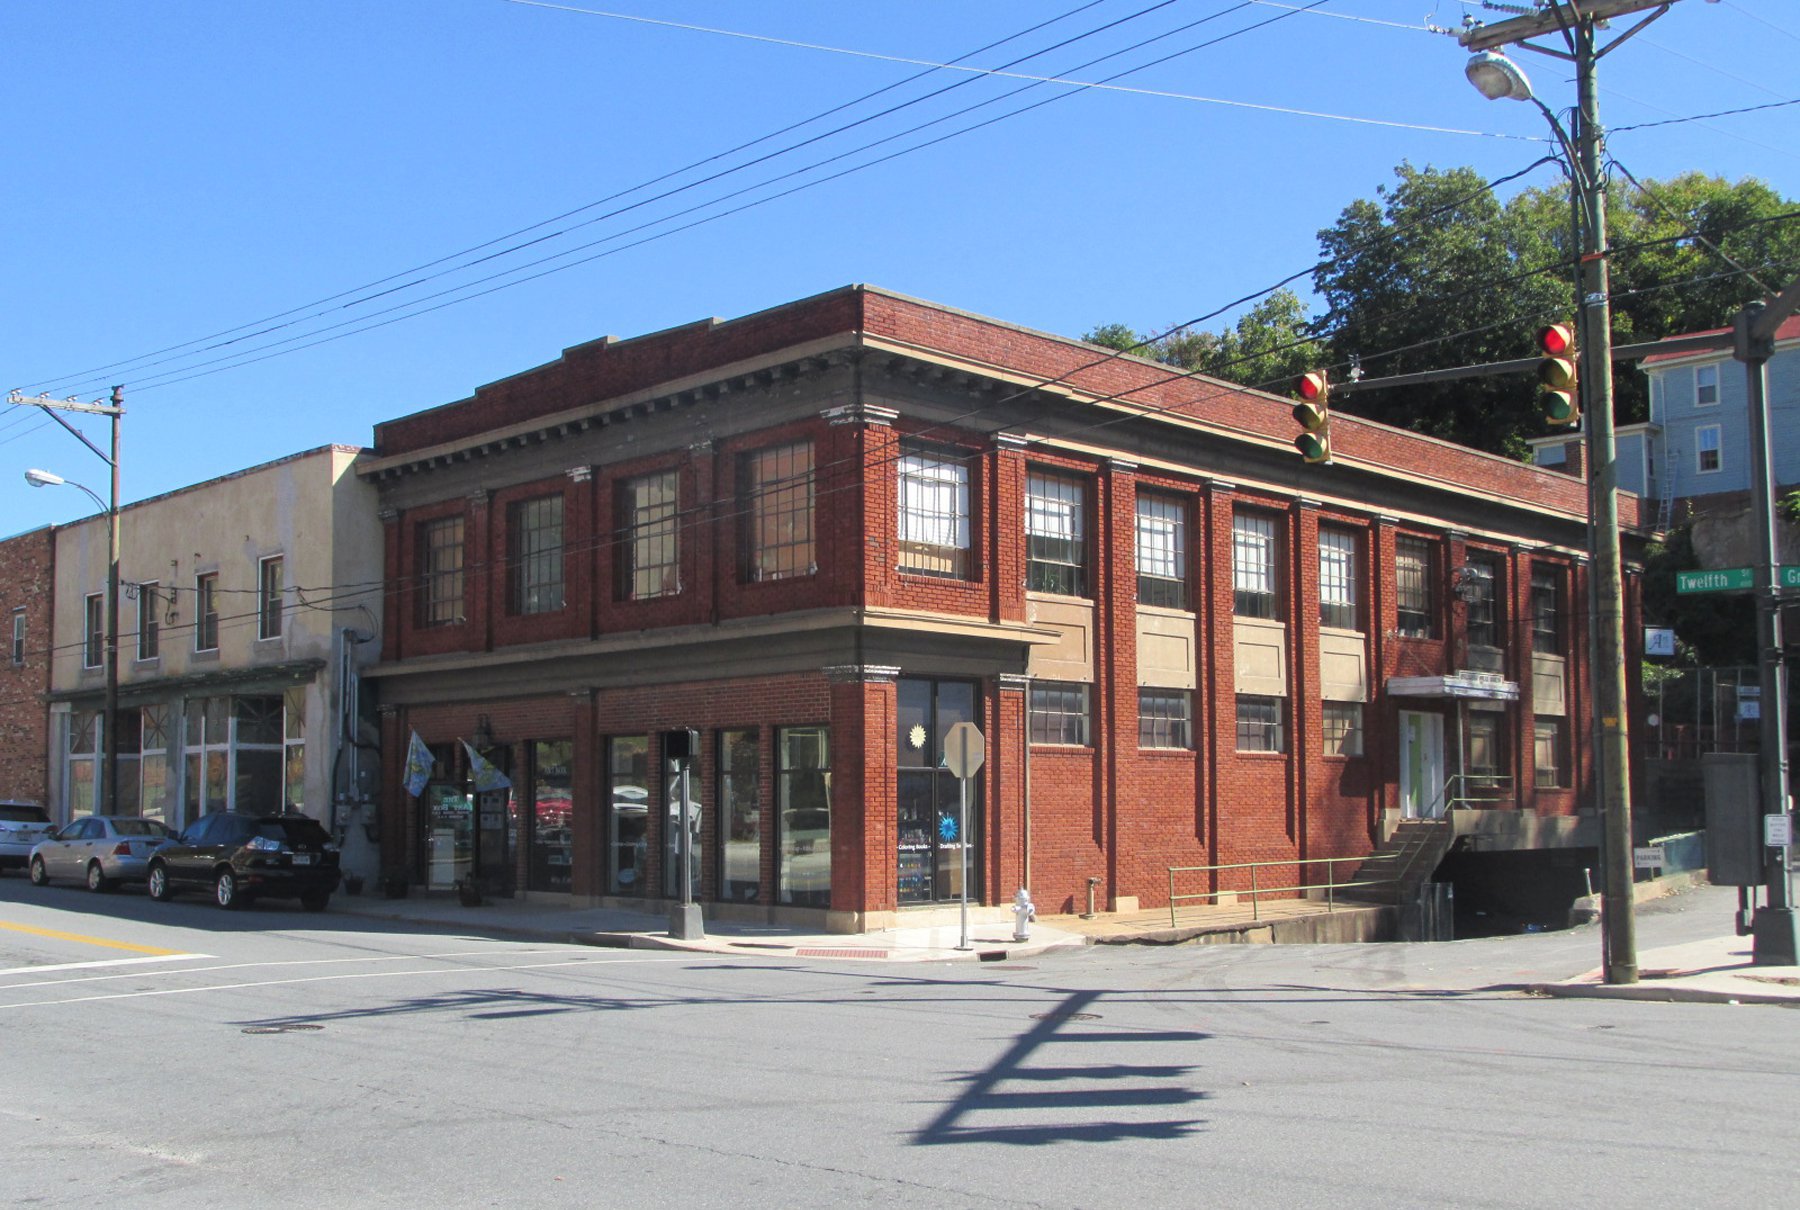 118-5495_Lynchburg_CH_Hill_Downtown_HD_Boundary_Expansion_2015_Steam_Bakery_front_oblique_VLR_online